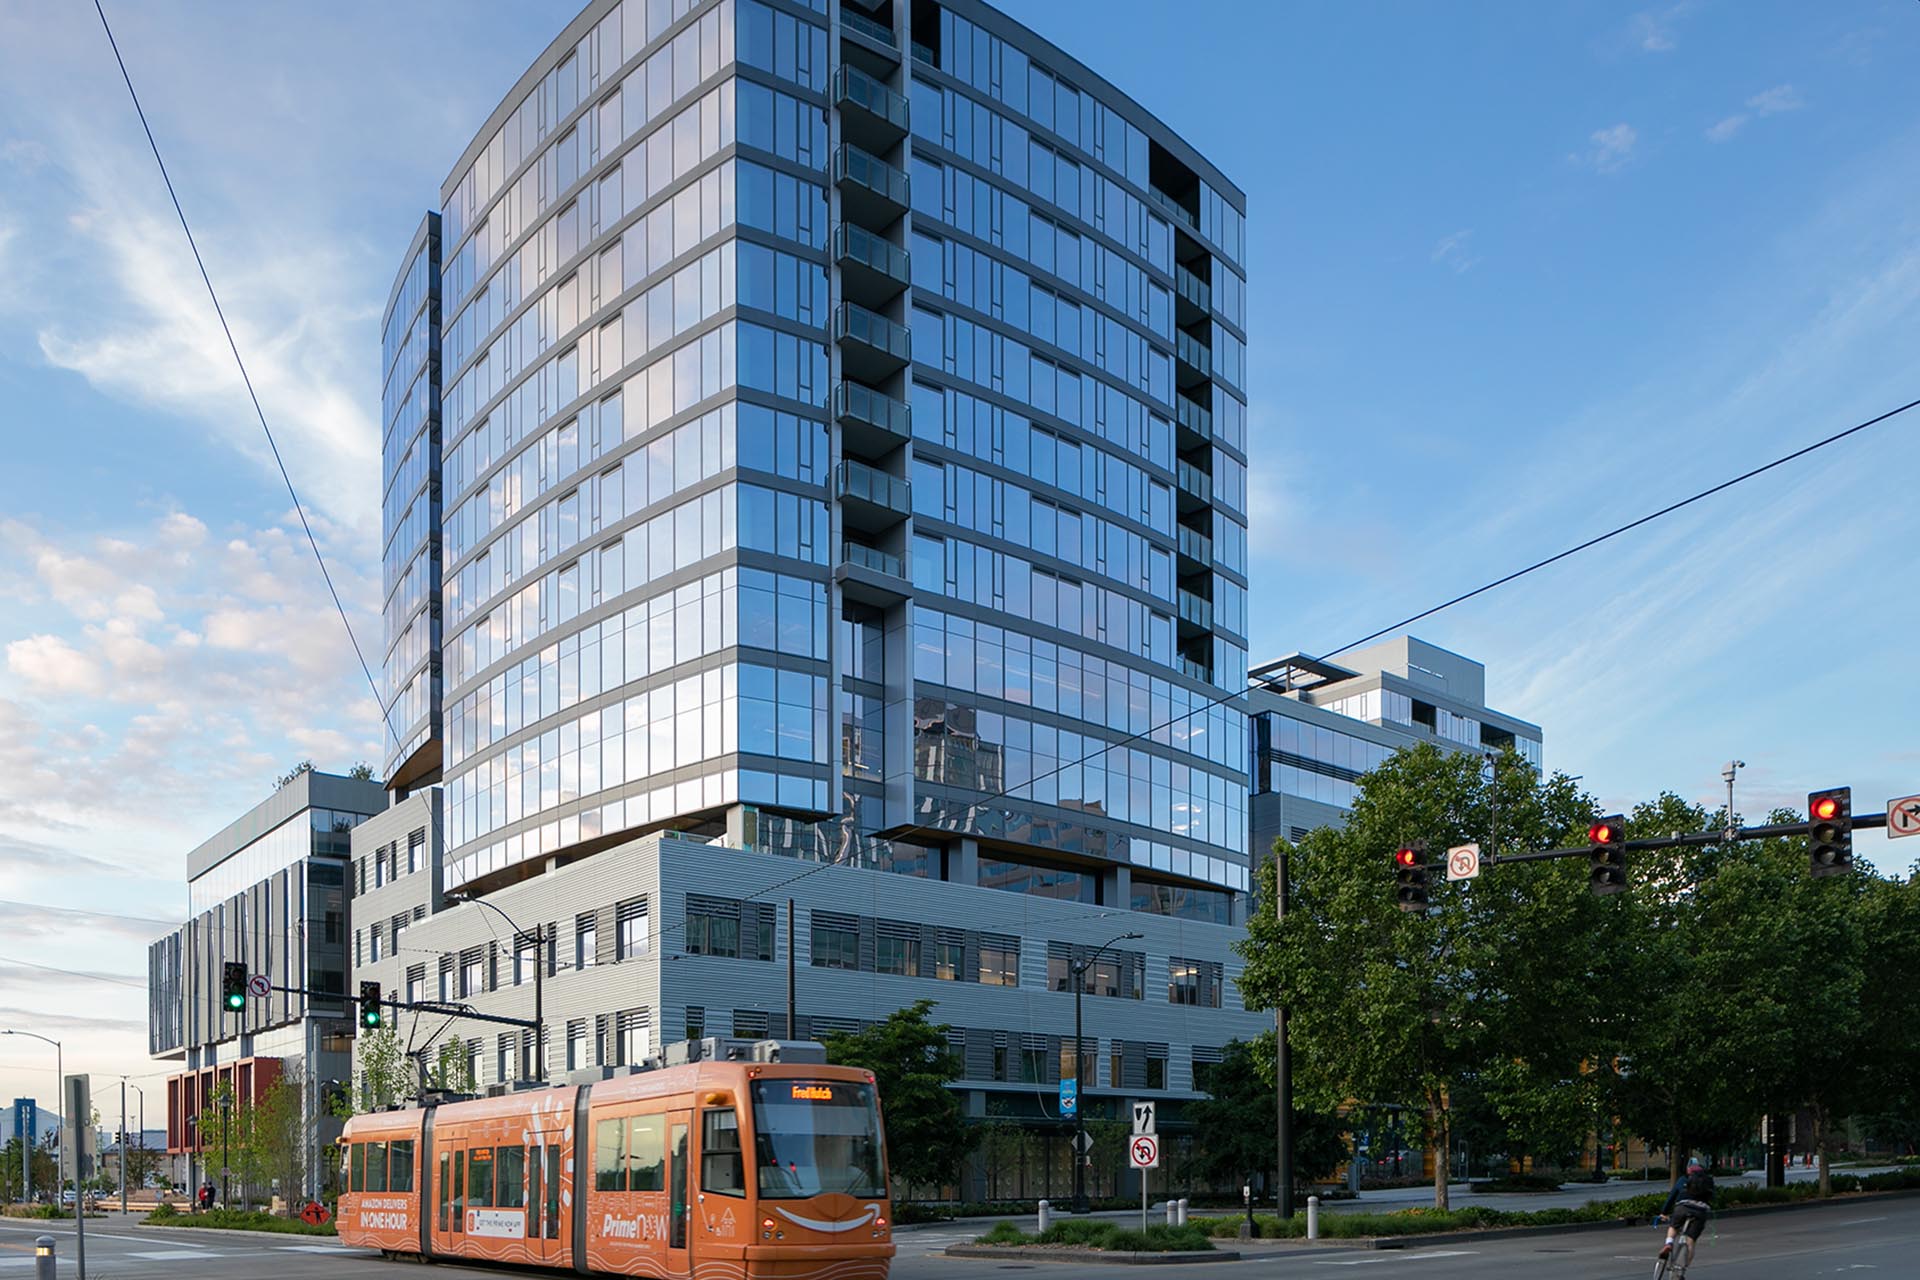 Exterior view of Helm SLU with the South Lake Union Transit passing by